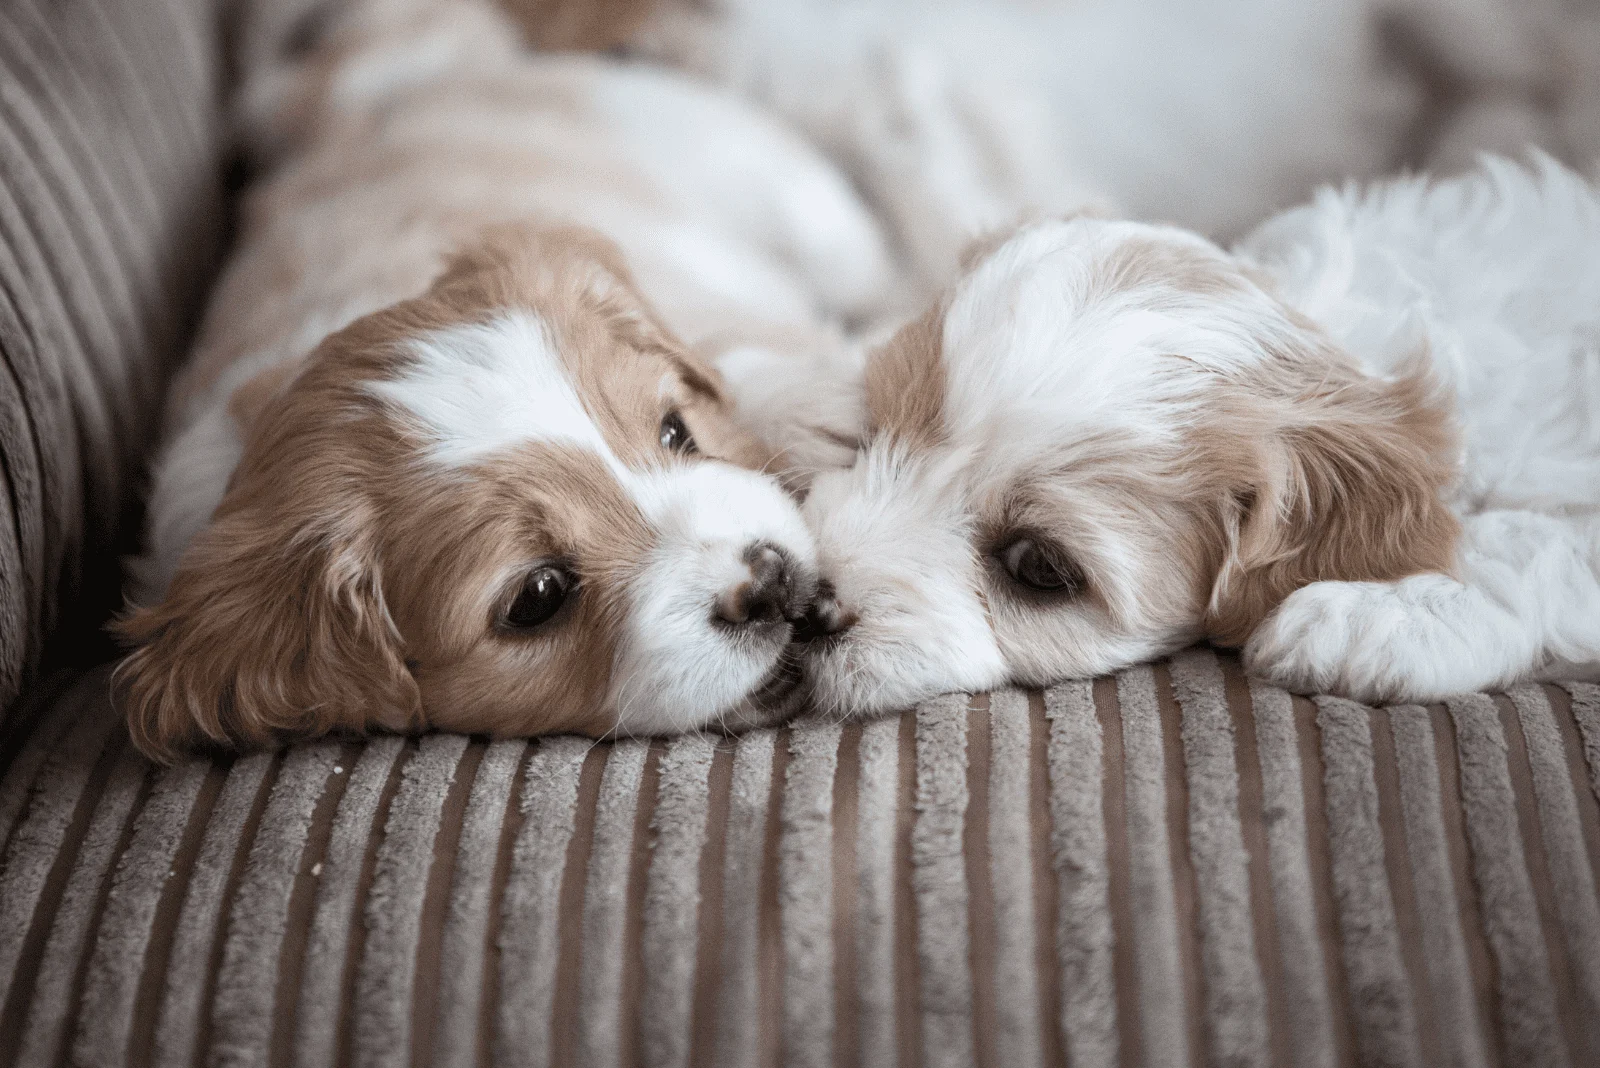 Cavachon two puppies lying next to each other